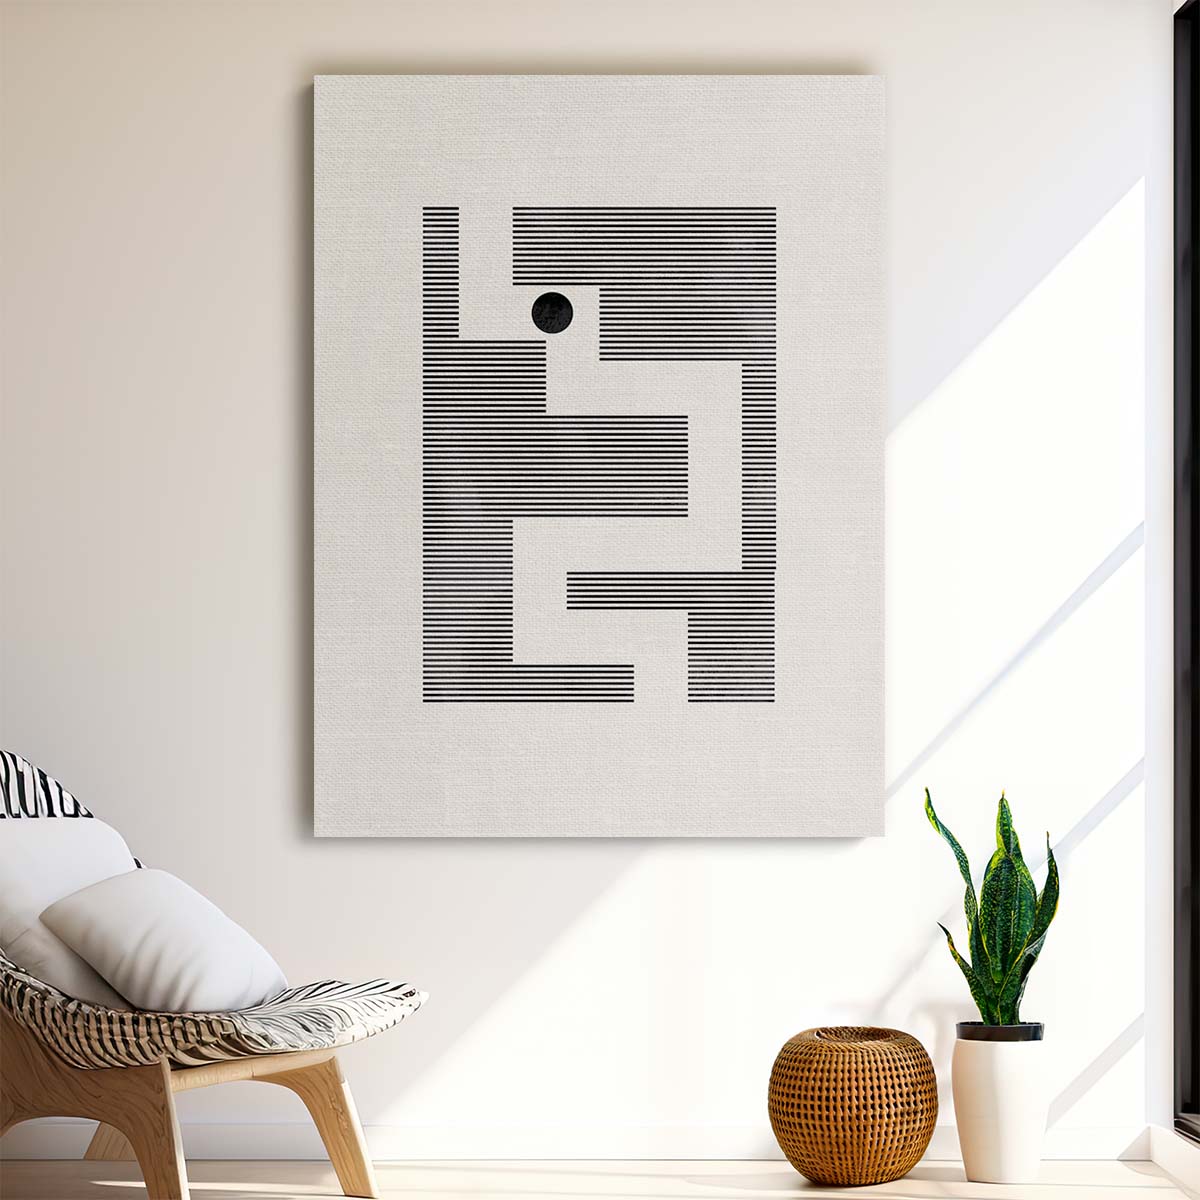 Abstract Geometric Maze Illustration, Gray & Black Line Art Drawing by Luxuriance Designs, made in USA